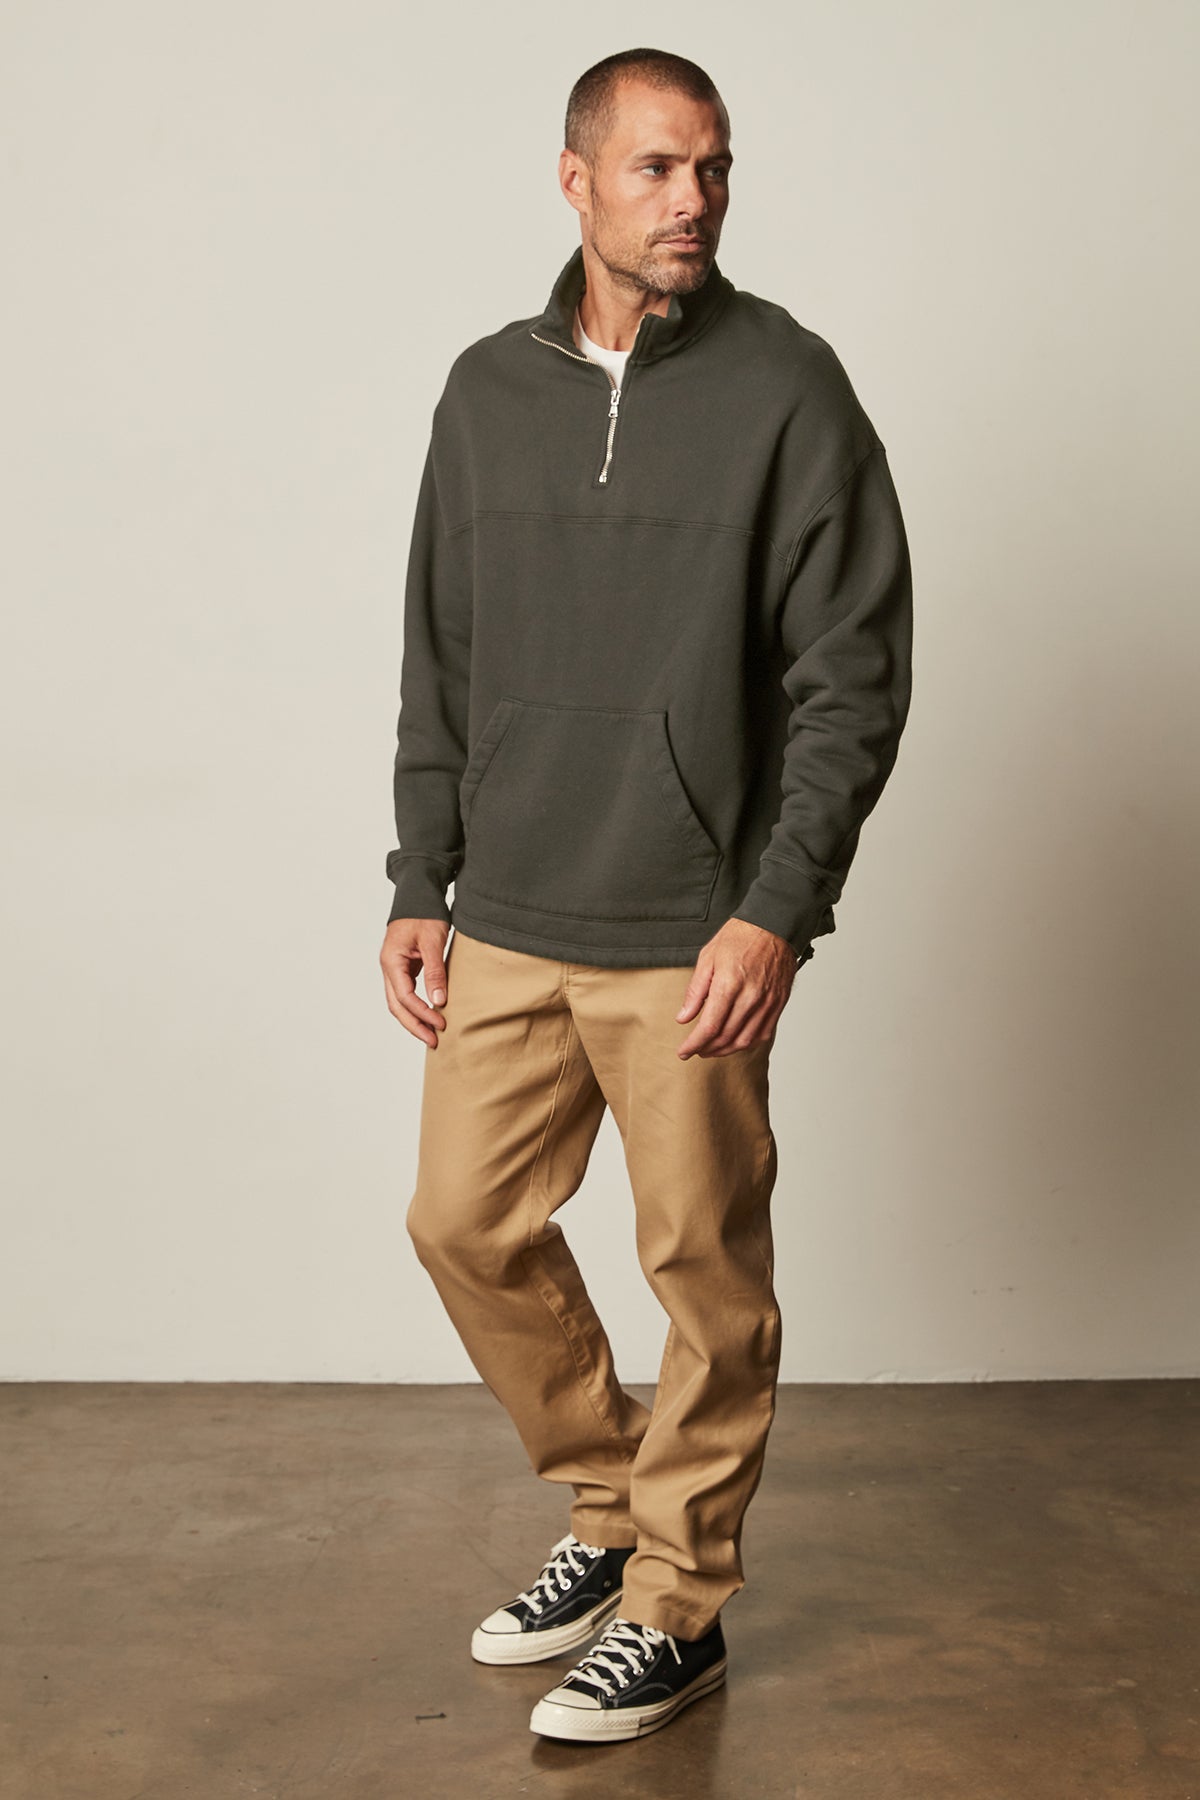 Baldwin Quarter-Zip Sweatshirt in dillweed front with khaki Aiden pants and Converse full length front-25601315569857